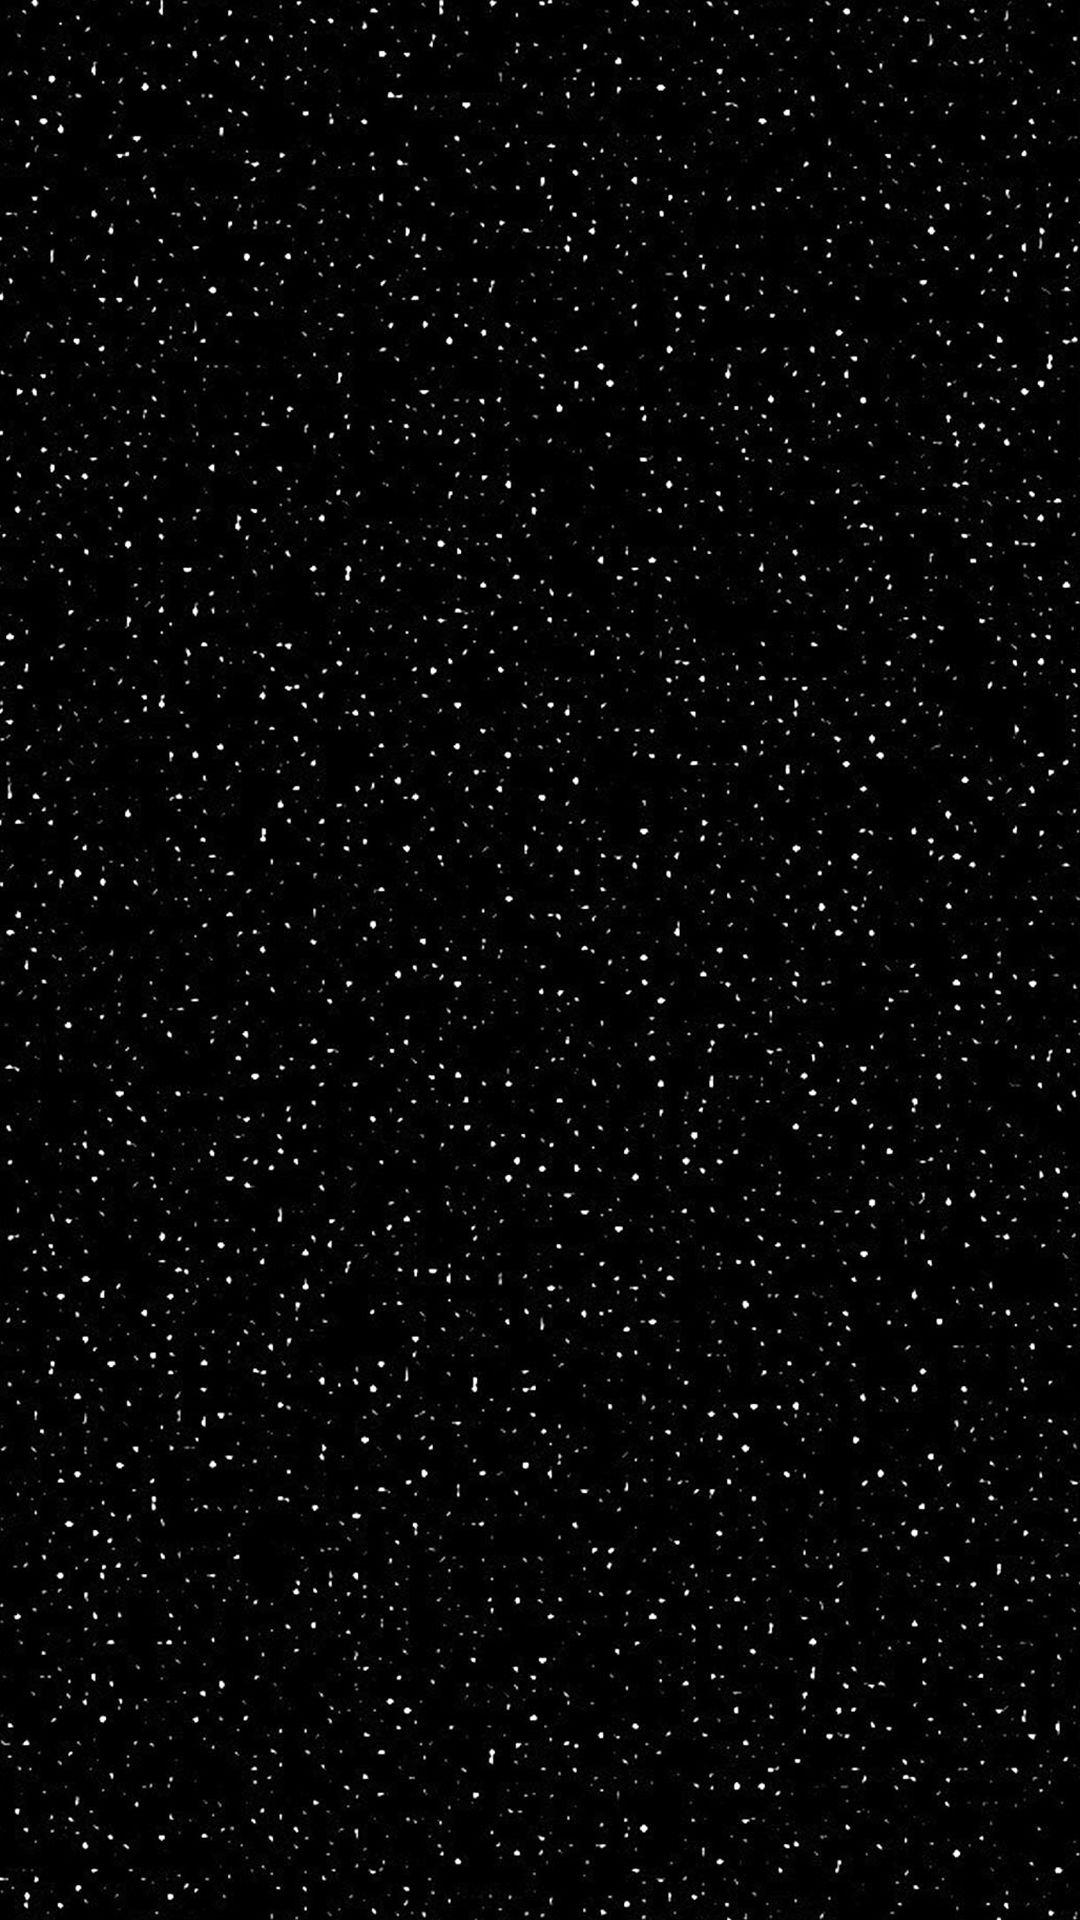 Simple Starry Sky Field iPhone 8 Wallpaper Download. iPhone